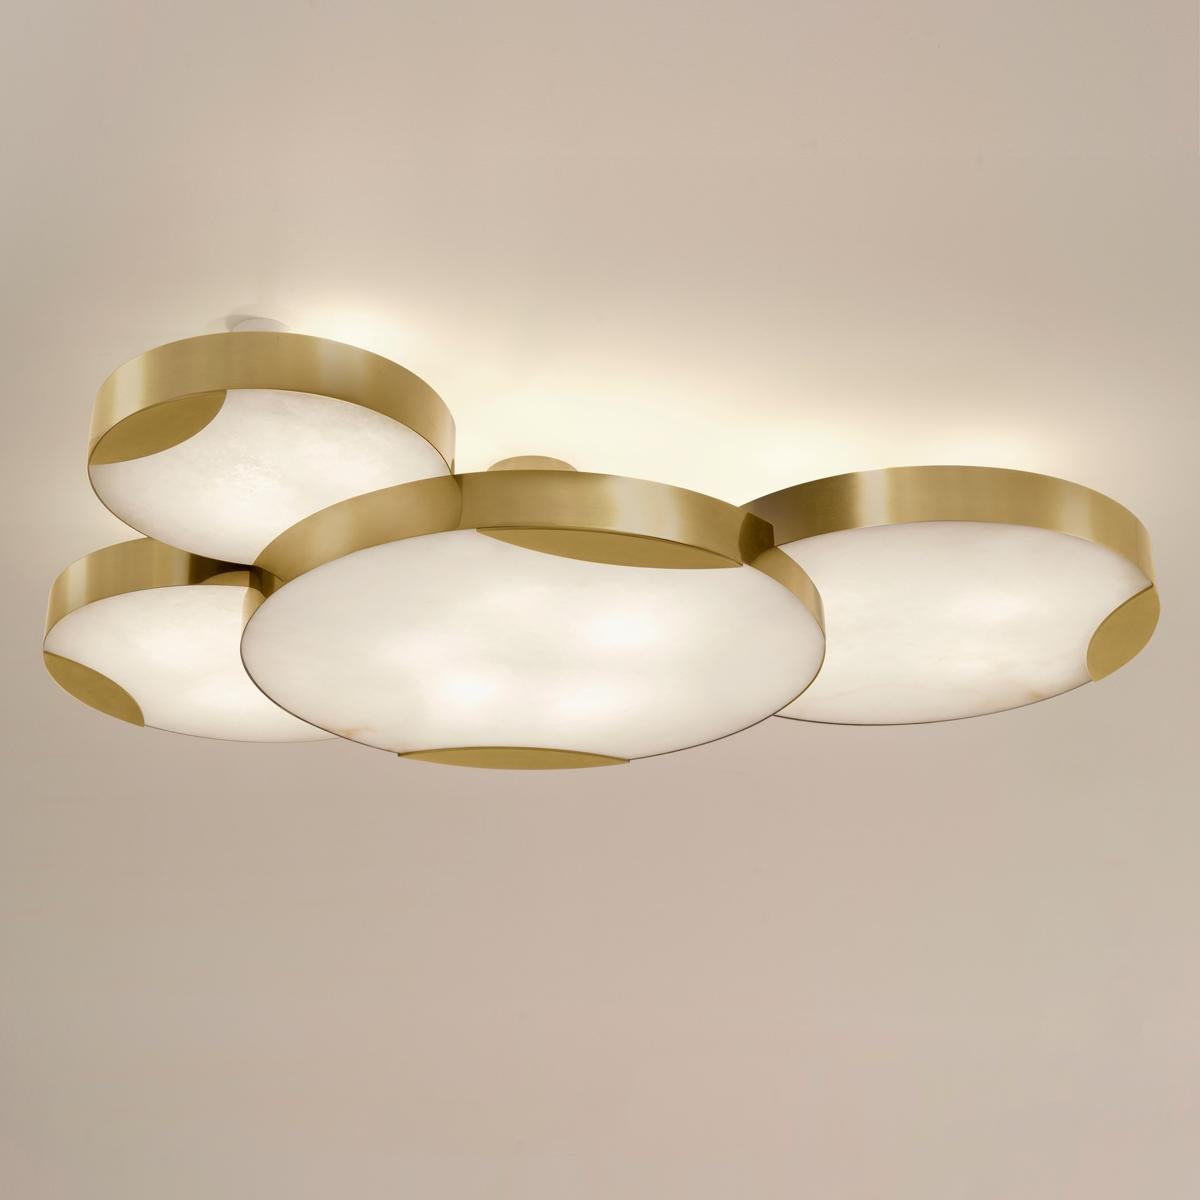 Cloud N.4 Ceiling Light by Gaspare Asaro-Peltro Finish For Sale 1